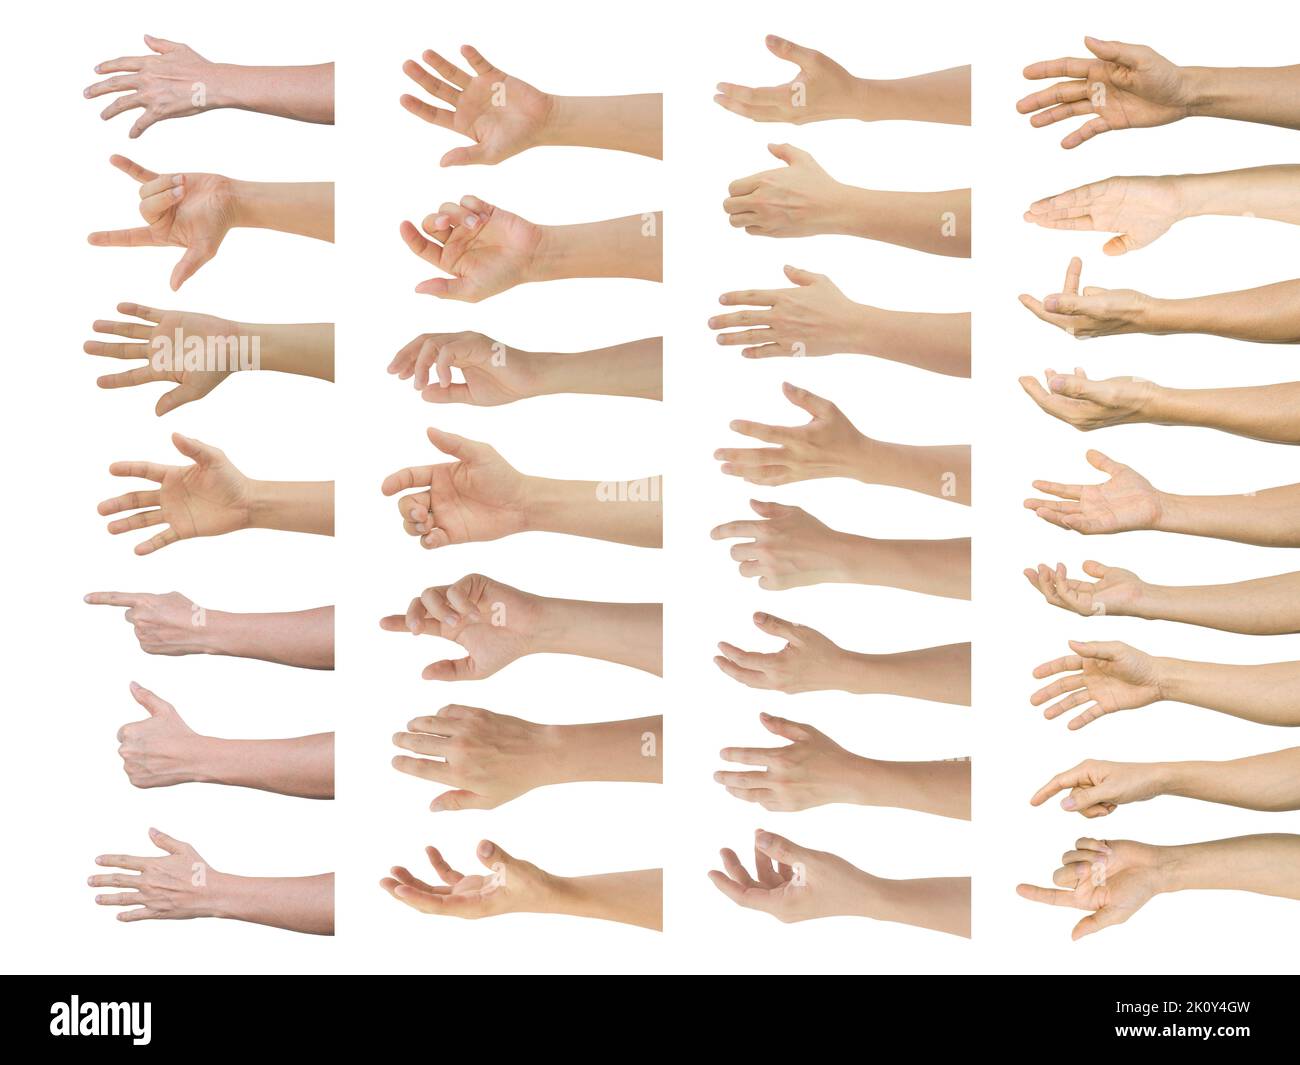 Group of Male hands gestures isolated on white background included clipping path. Stock Photo